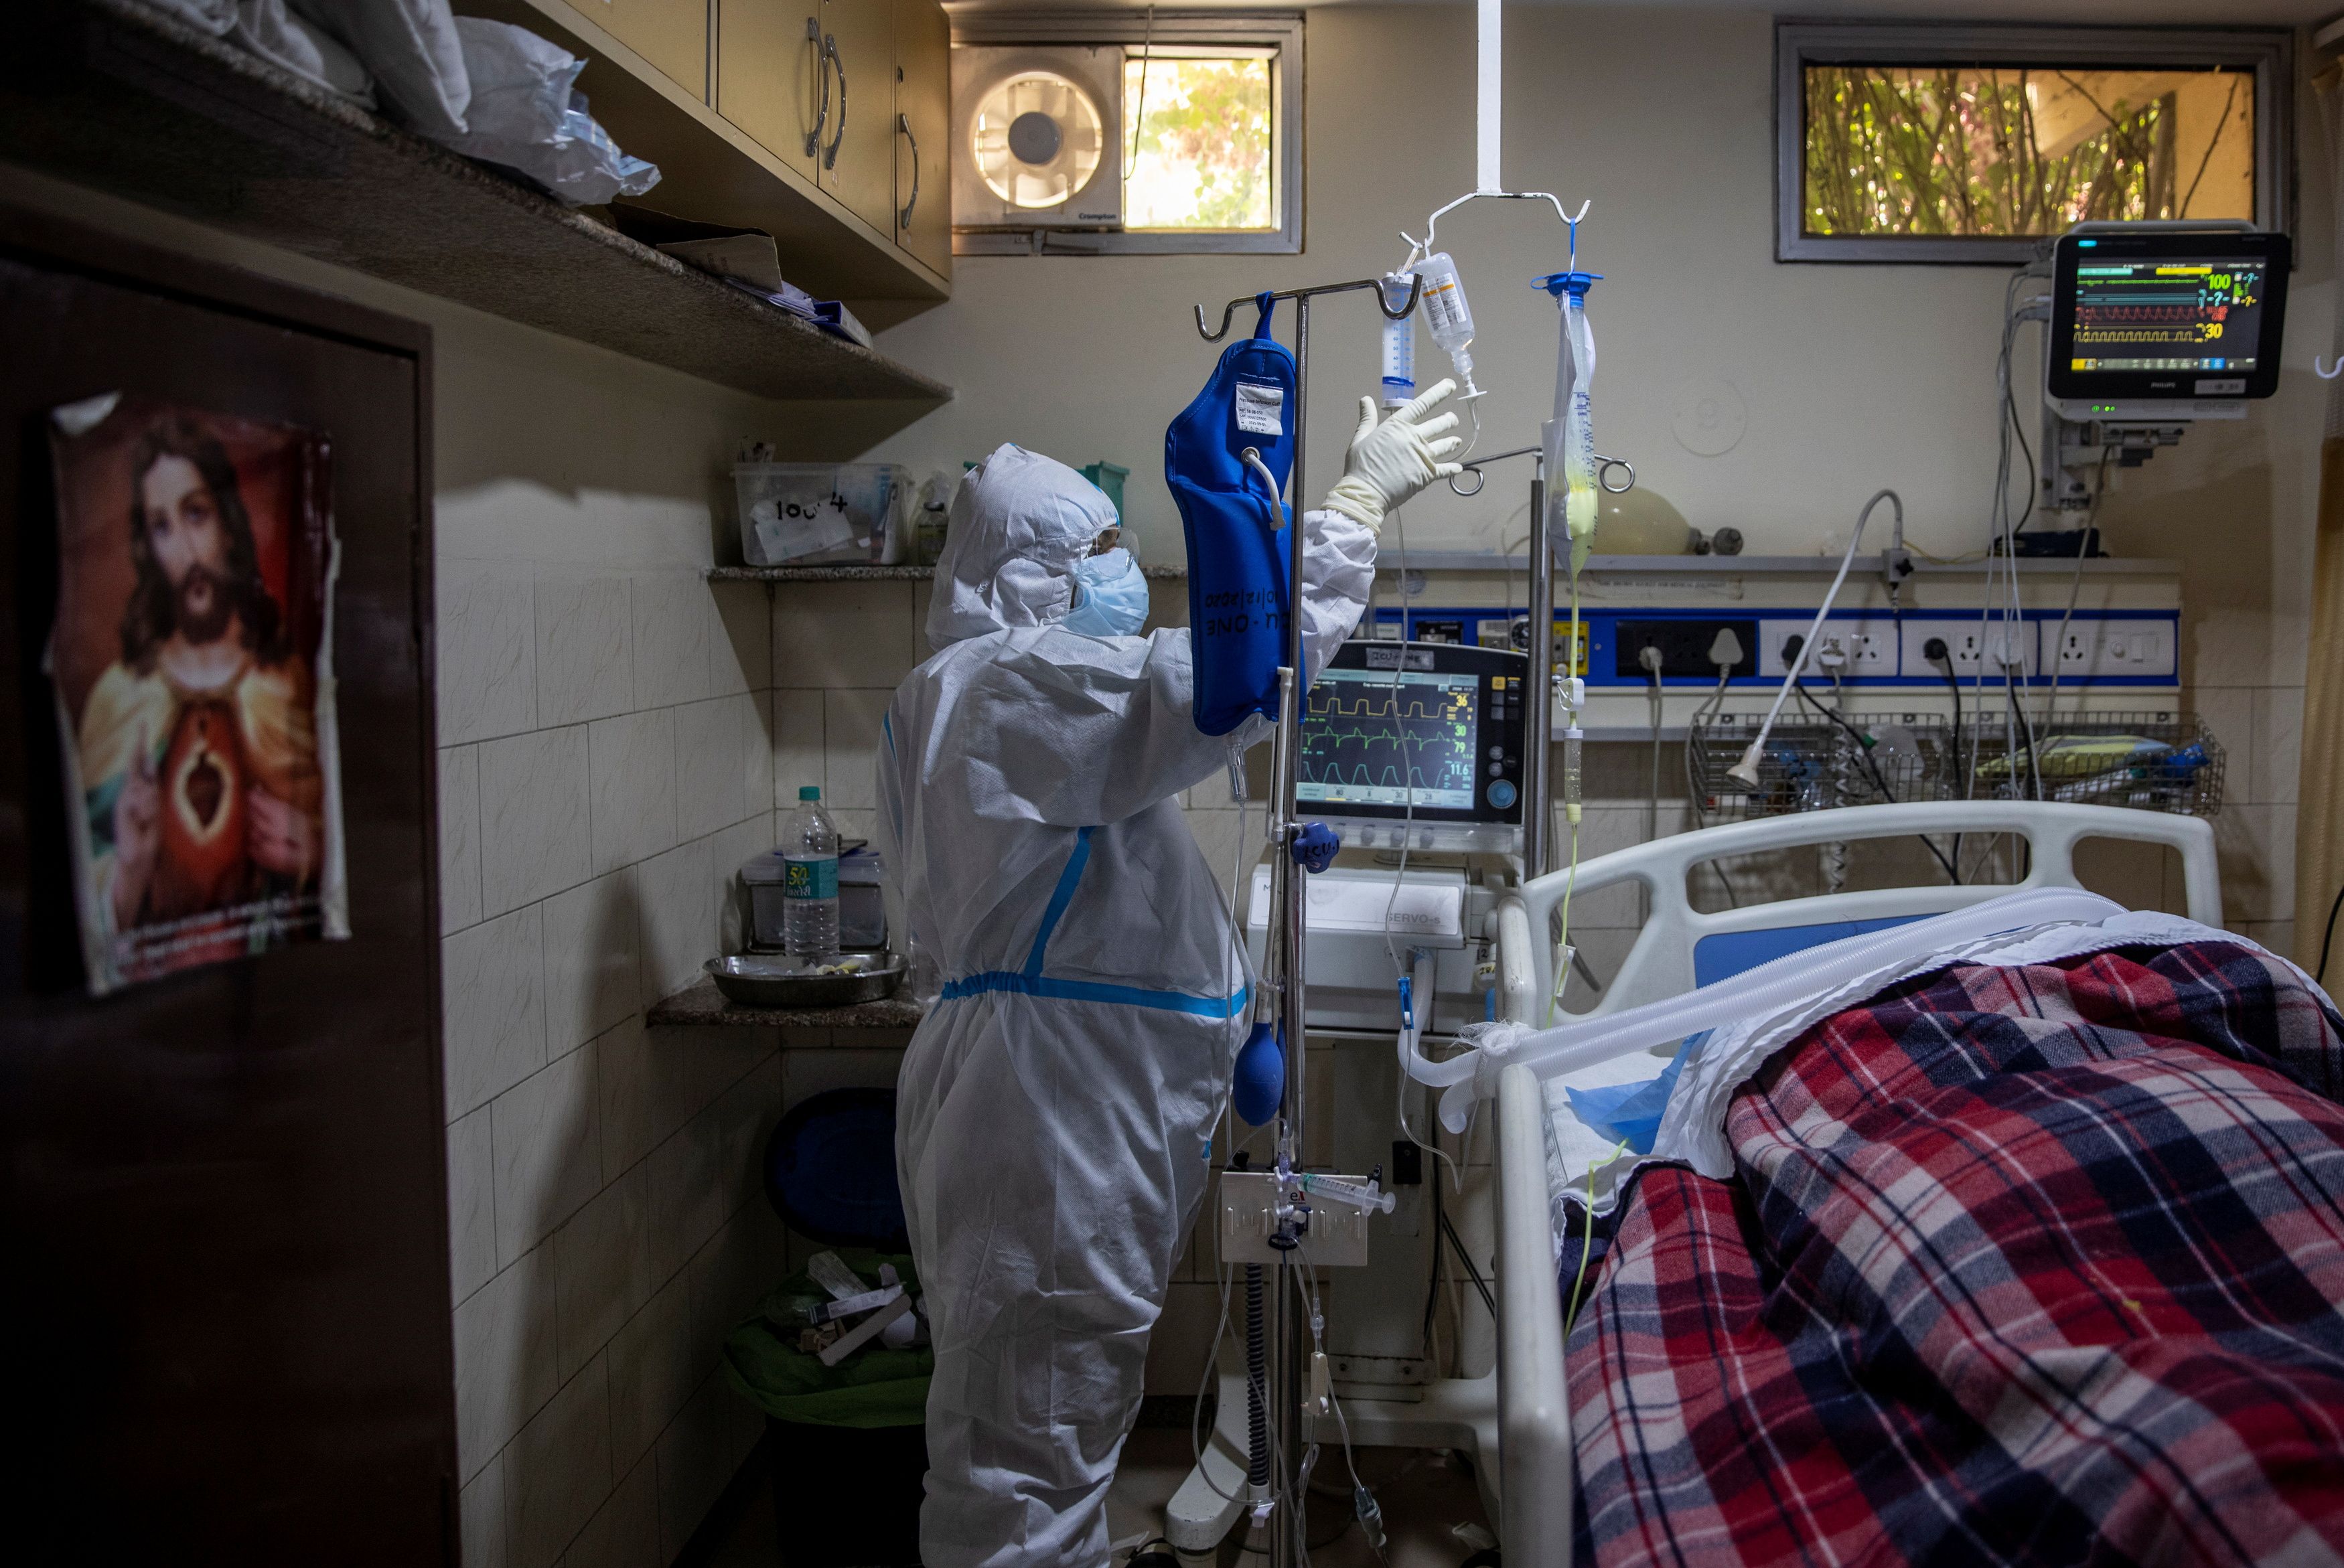 A medical worker tends to a patient suffering from COVID-19, inside the ICU ward at Holy Family Hospital in New Delhi